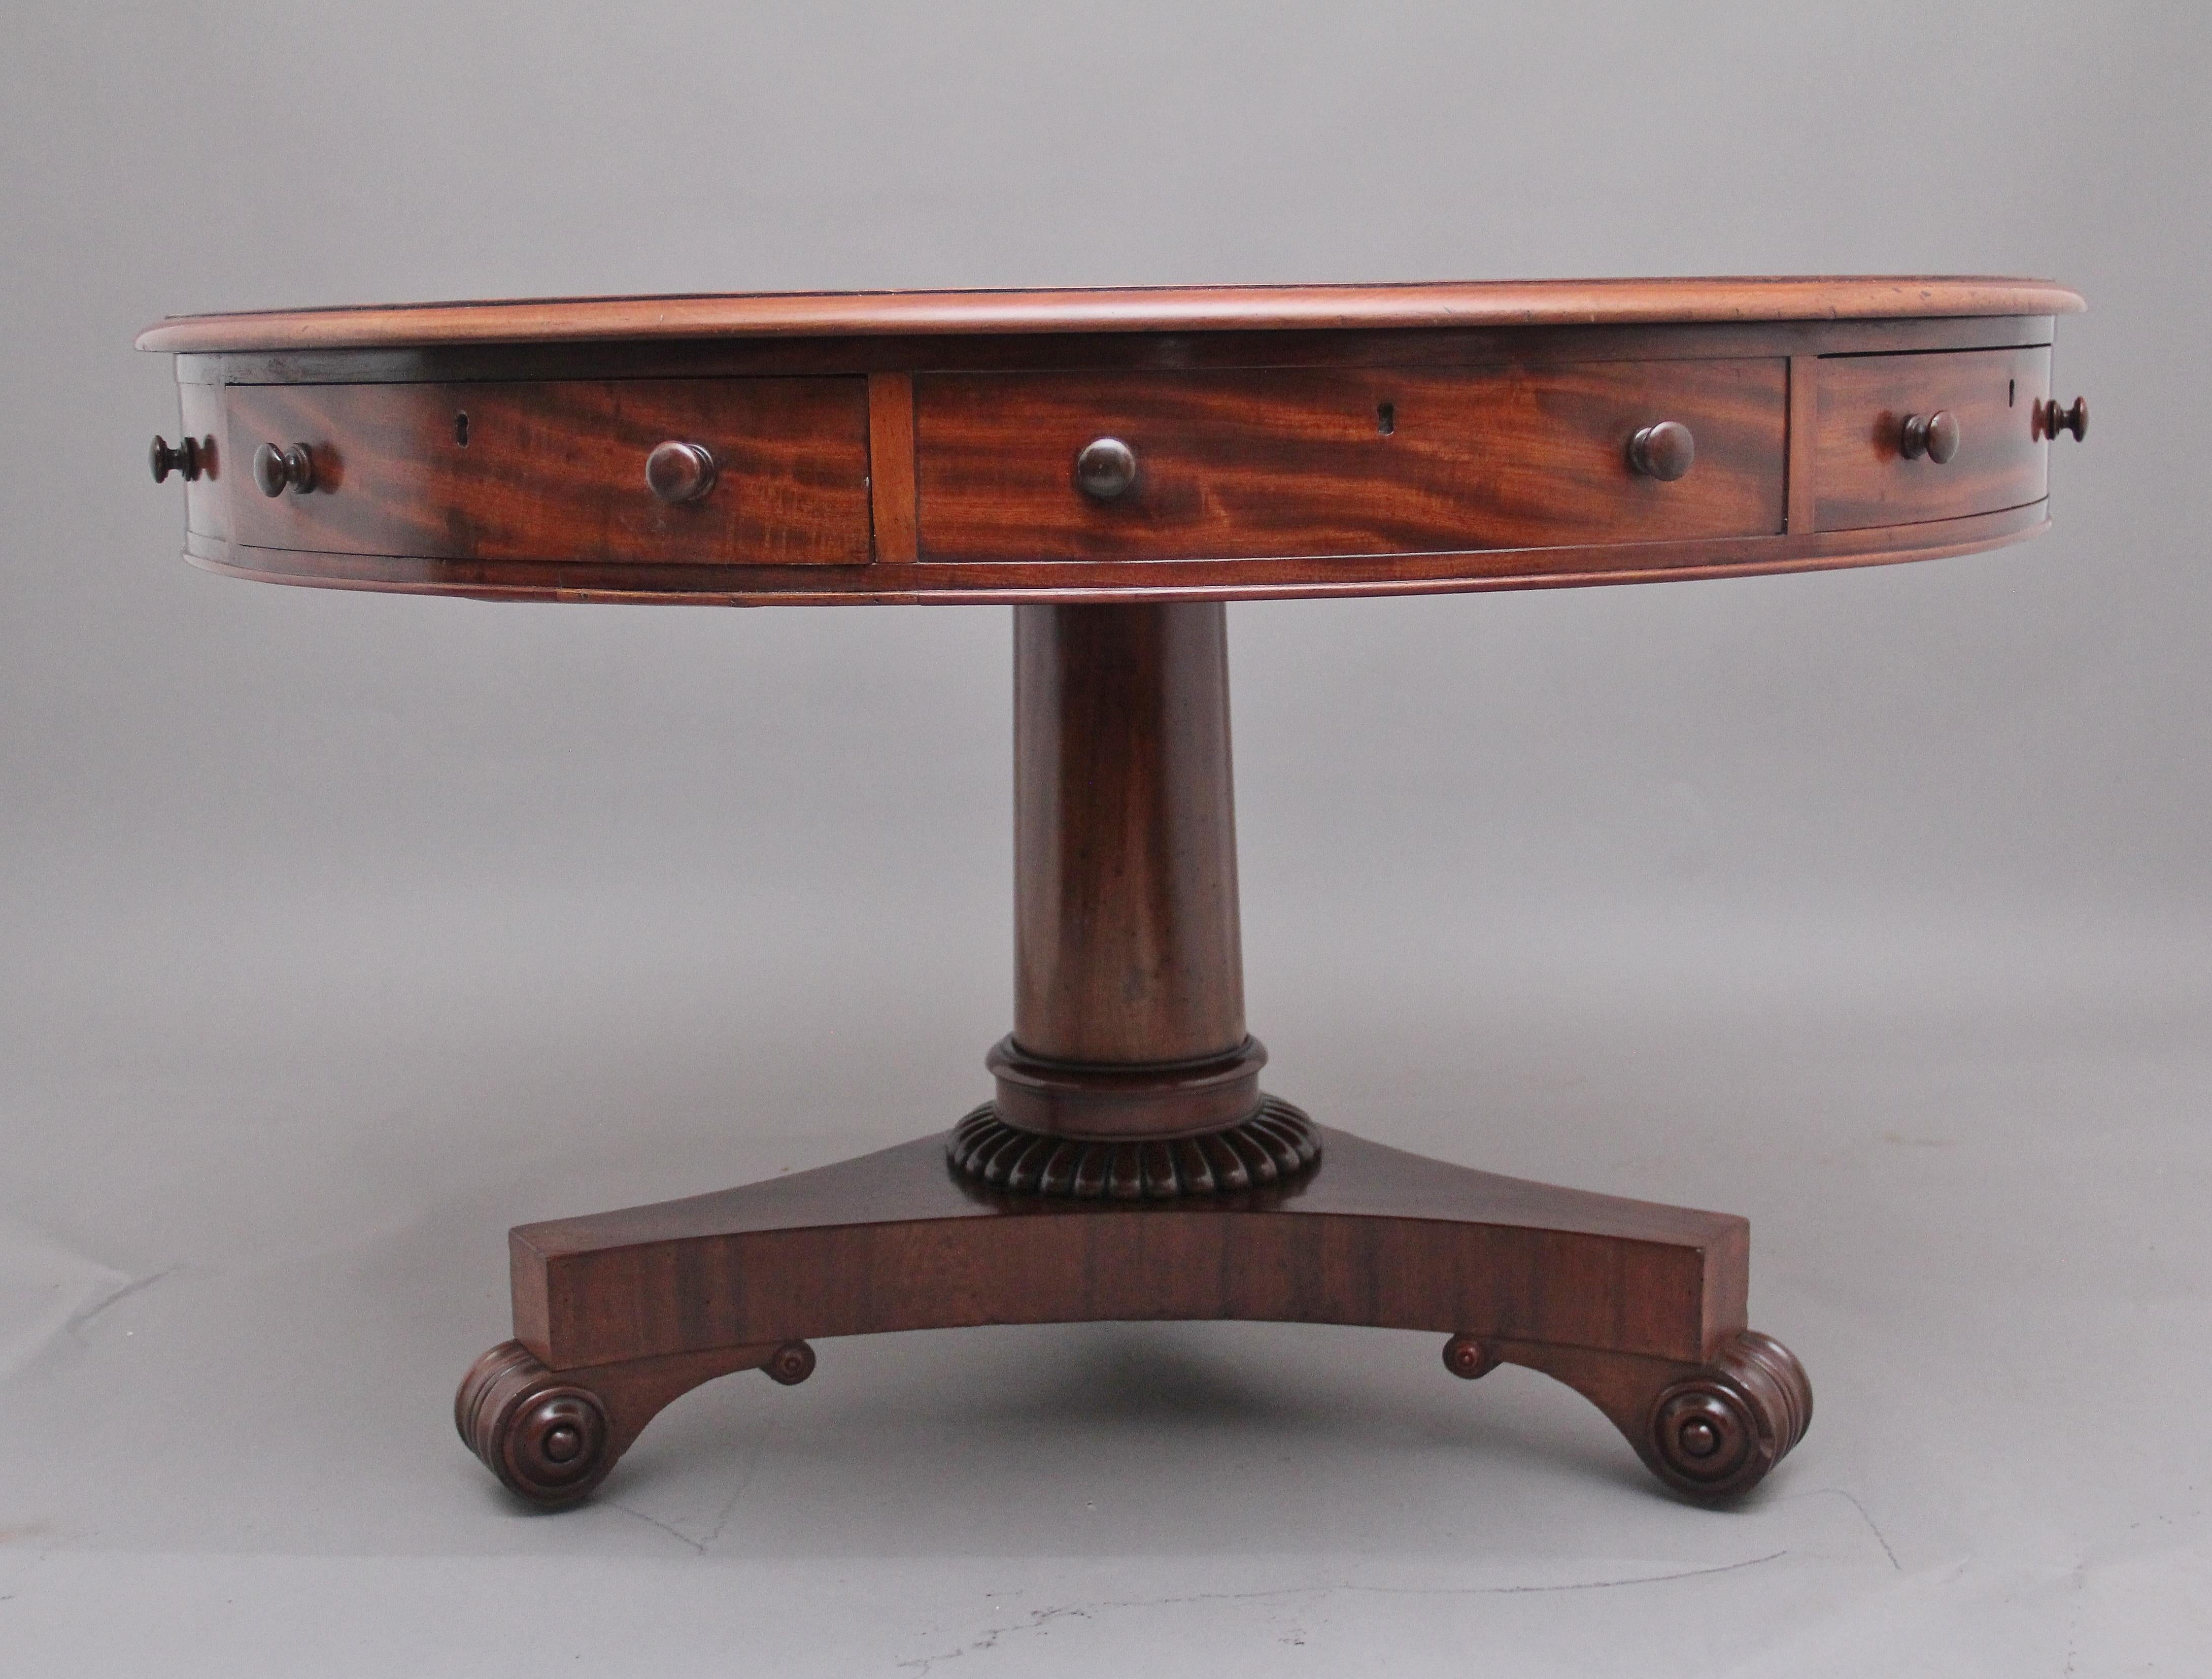 Early 19th Century mahogany drum table, having a lovely figured moulded edge top above a frieze with a combination of four working mahogany lined drawers and four faux draws, with the original wooden turned knob handles, supported on an elegant